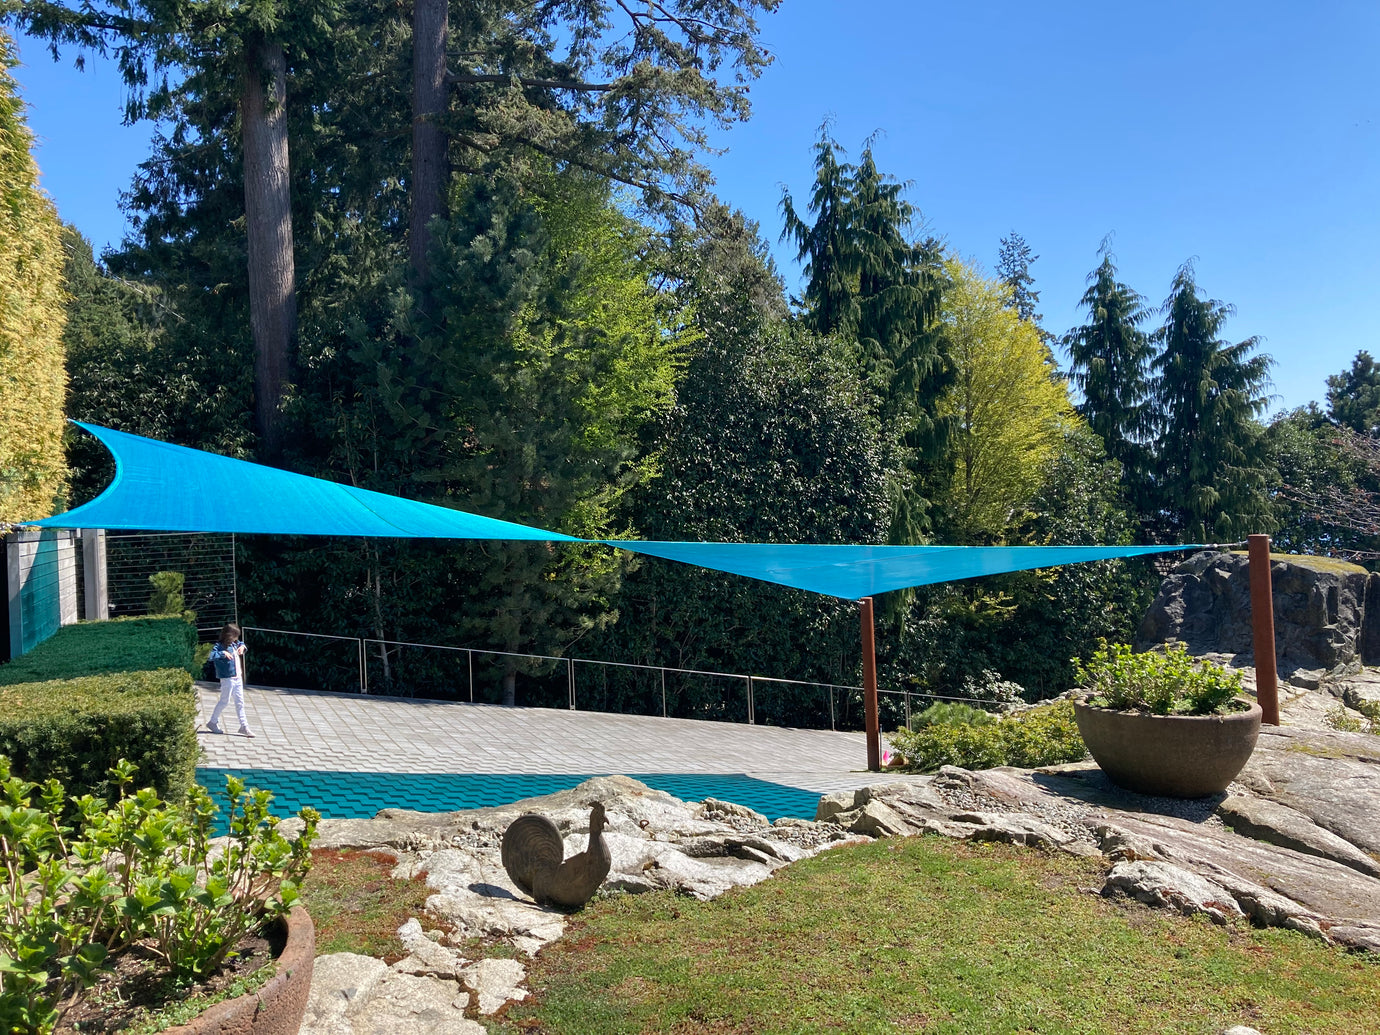  Vibrant blue canopy awnings stretch between poles, providing ample shade in a beautiful outdoor area. The awnings create a cozy space beneath, surrounded by lush greenery, tall trees, and well-maintained landscaping, enhancing the serene atmosphere.